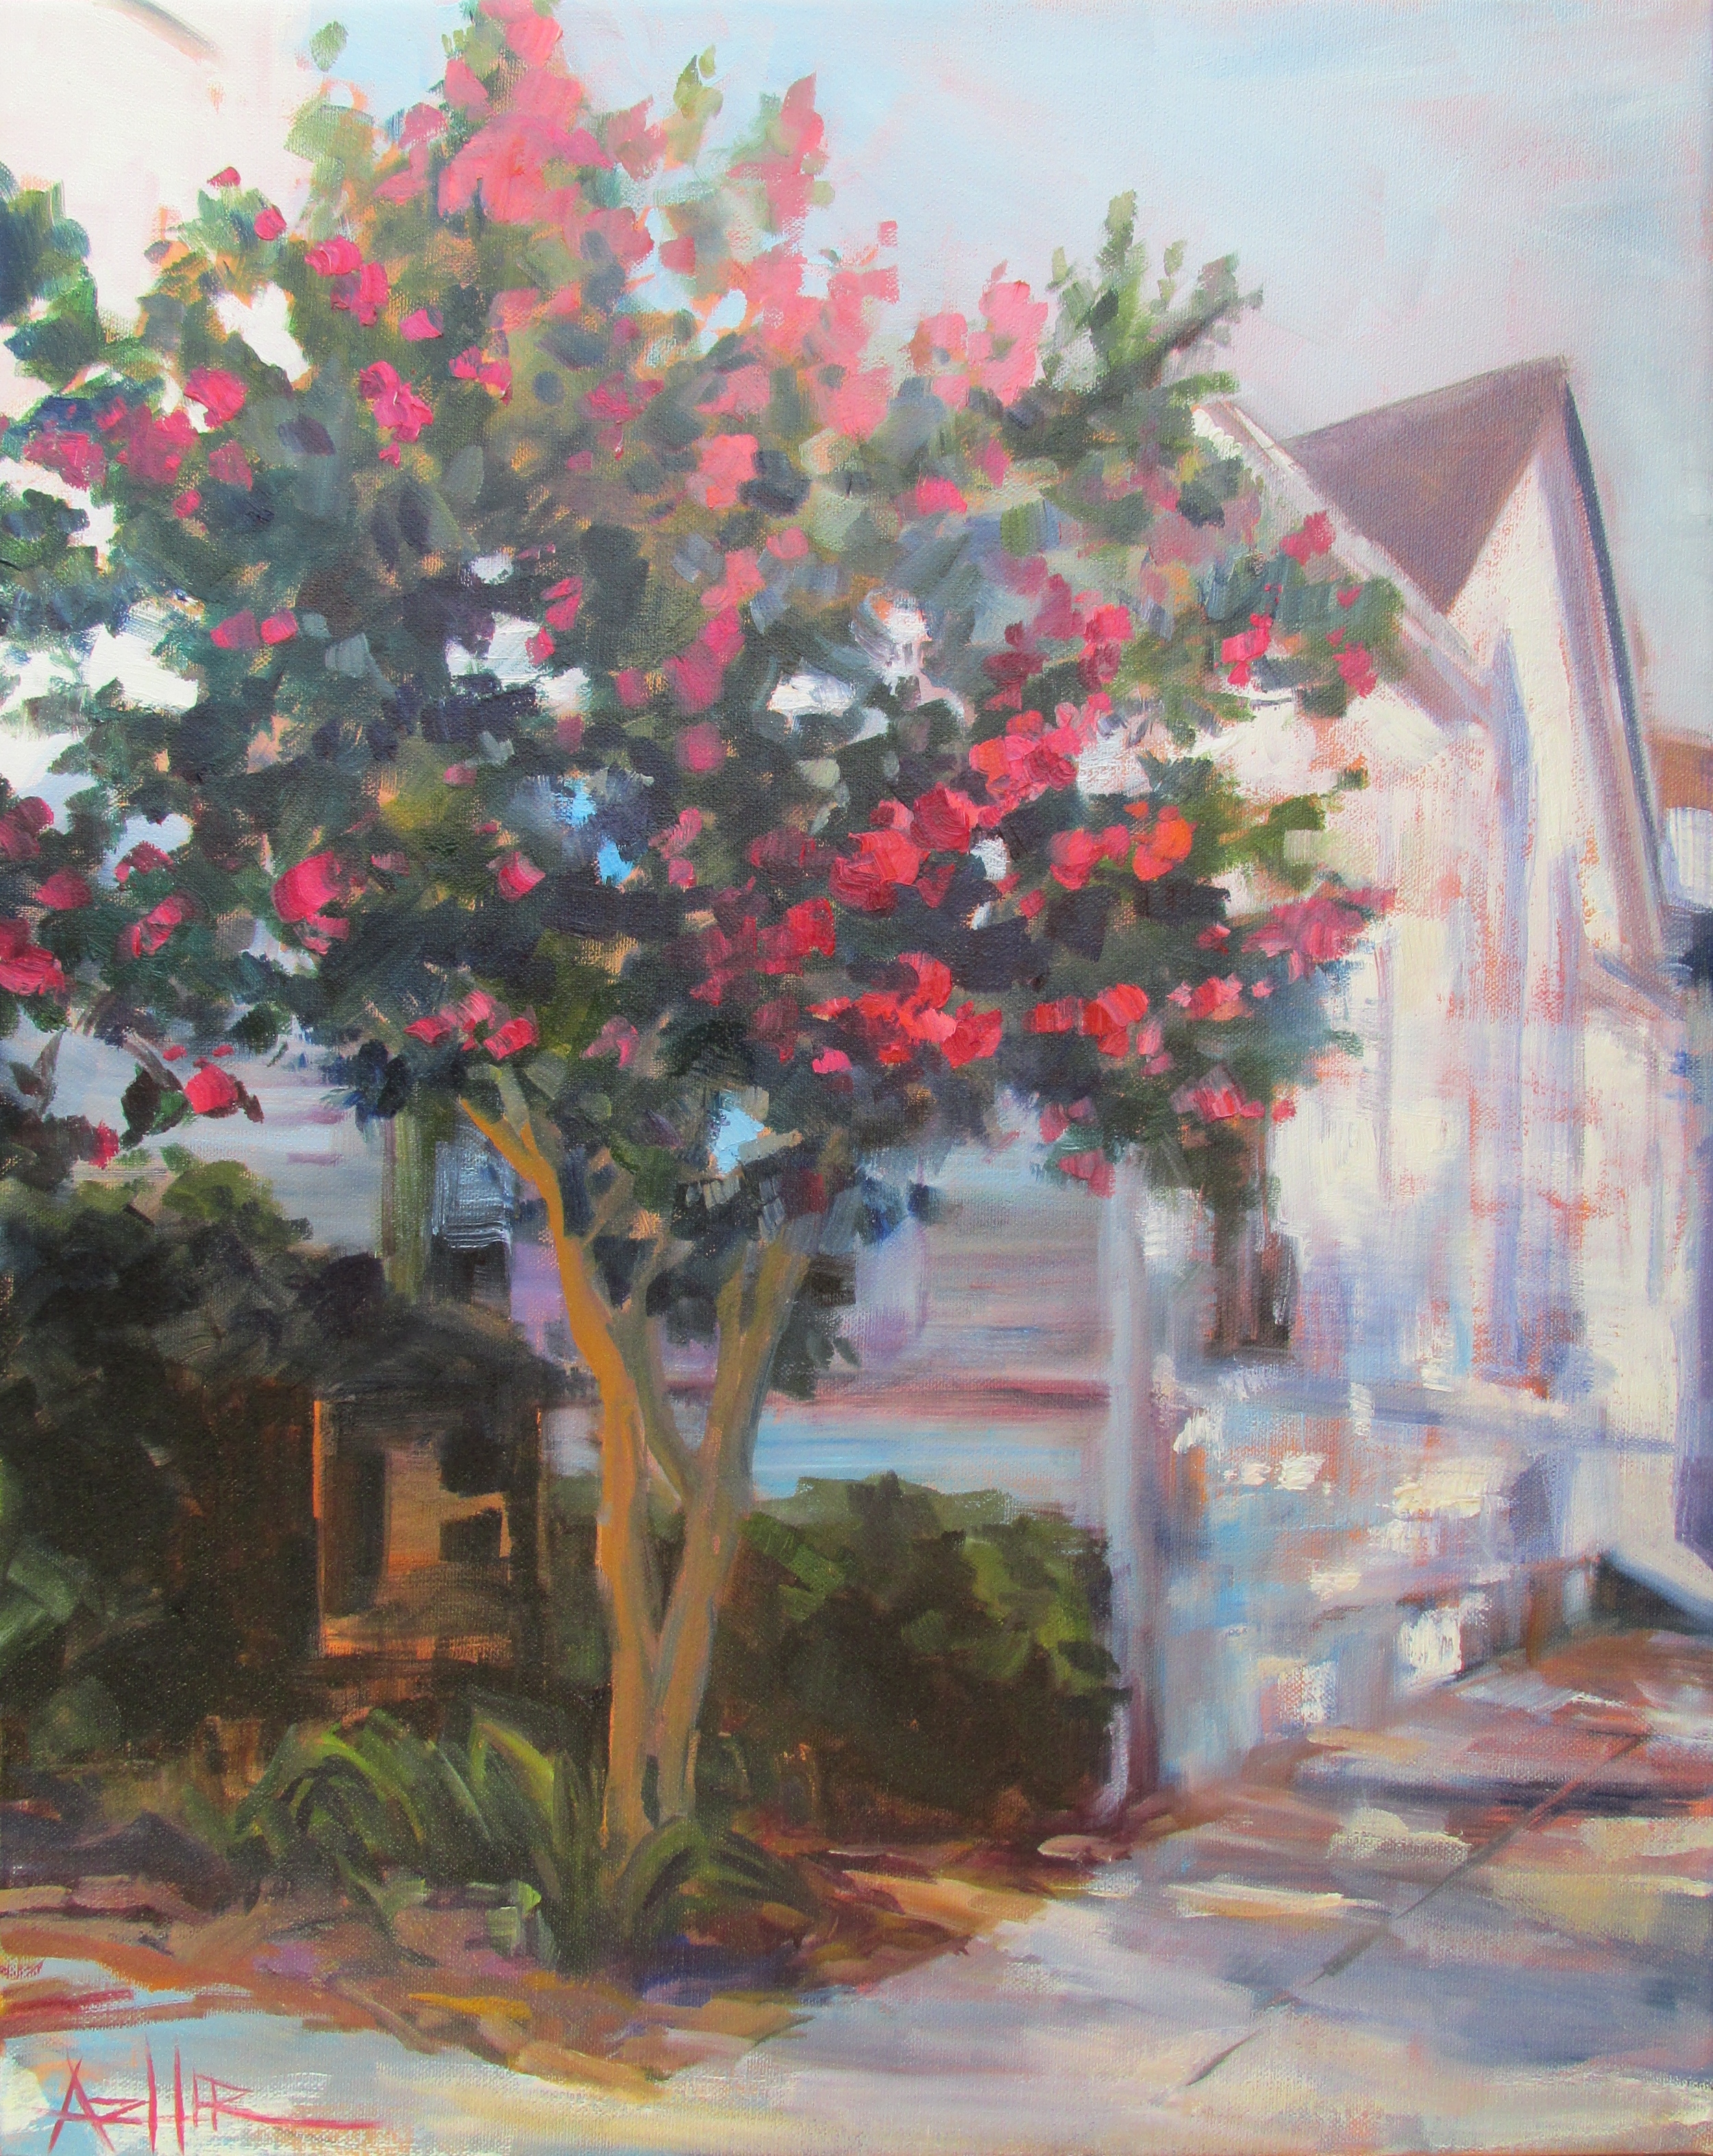 SOLD, The Crepe Myrle Tree, Copyright 2014 Hirschten, Oil on Canvas 16" x 20"